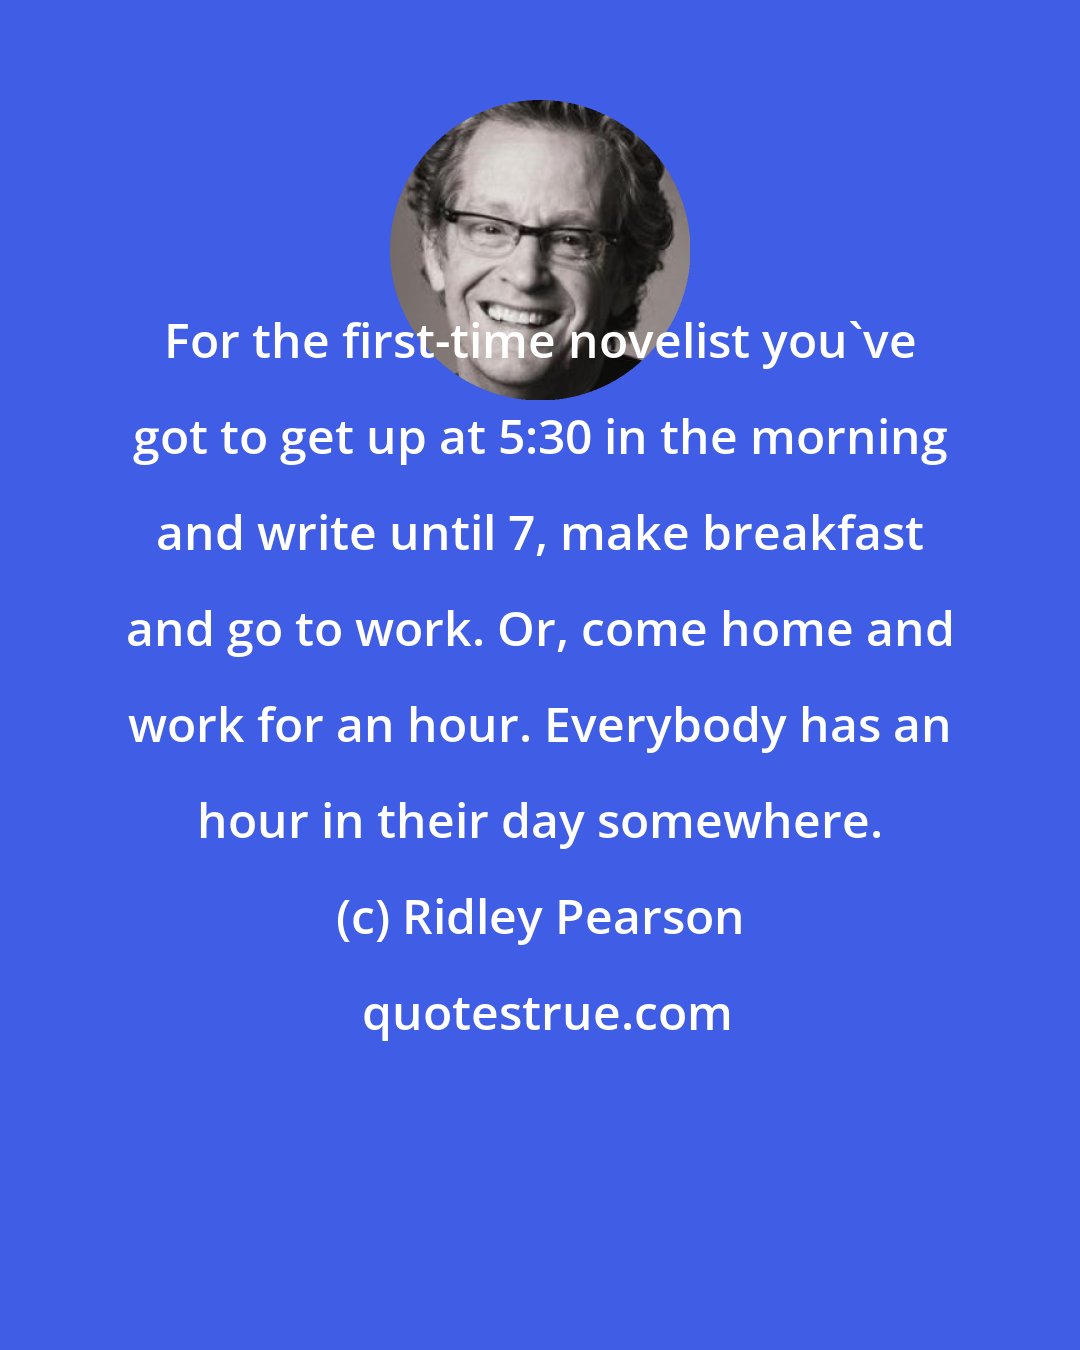 Ridley Pearson: For the first-time novelist you've got to get up at 5:30 in the morning and write until 7, make breakfast and go to work. Or, come home and work for an hour. Everybody has an hour in their day somewhere.